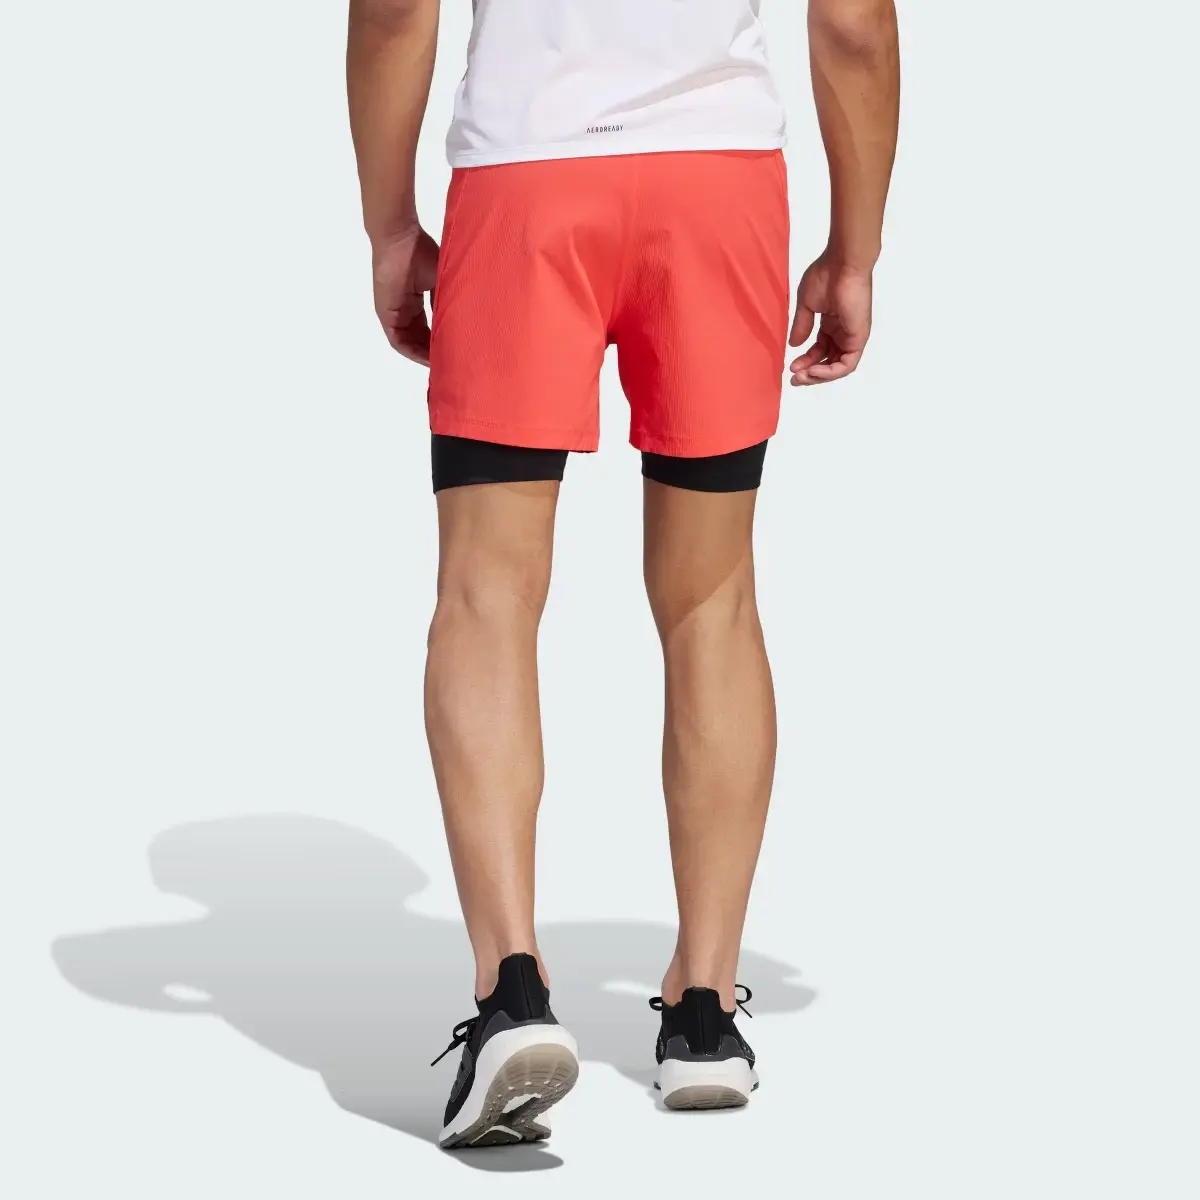 Adidas Power Workout Two-in-One Shorts. 2